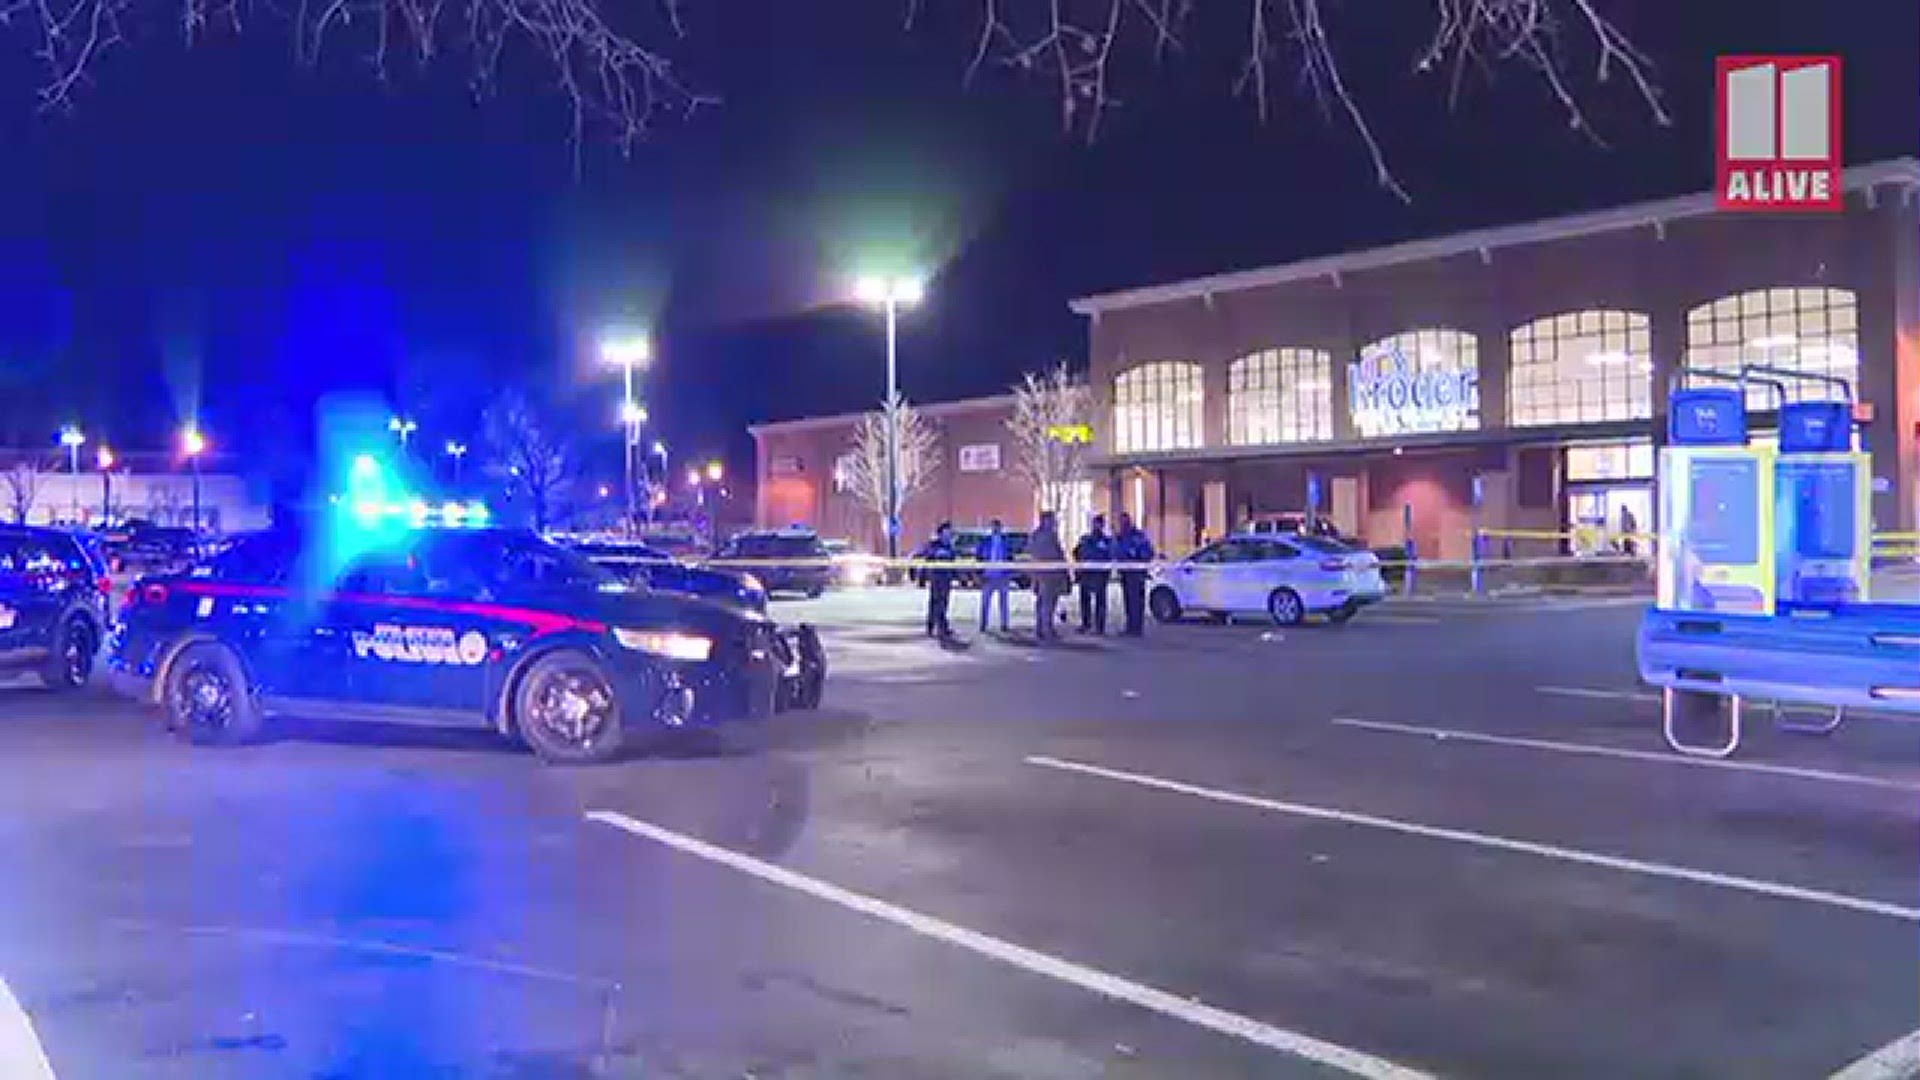 11Alive sent a crew to the scene, where police were in parking lot investigating the situation.